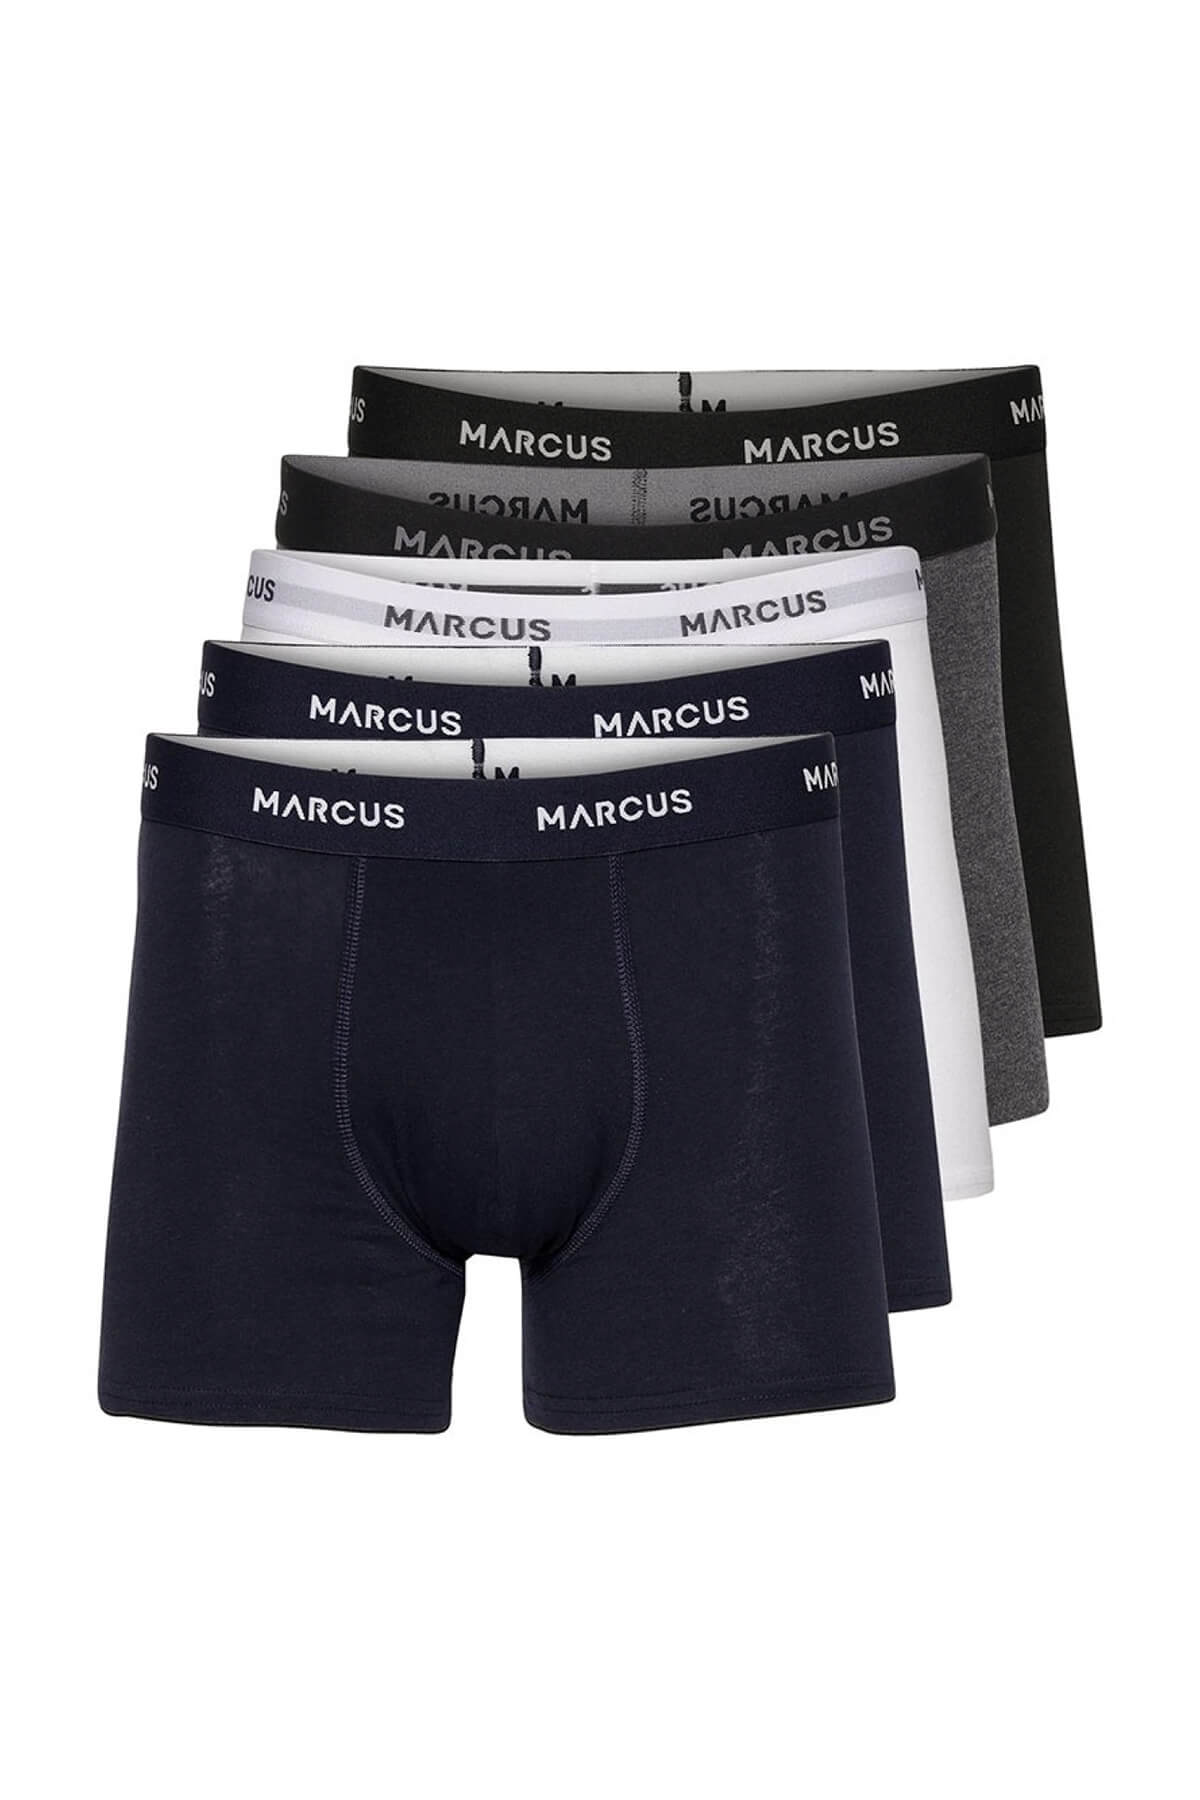 Marcus Boxer 5 Pack Roxy Solid